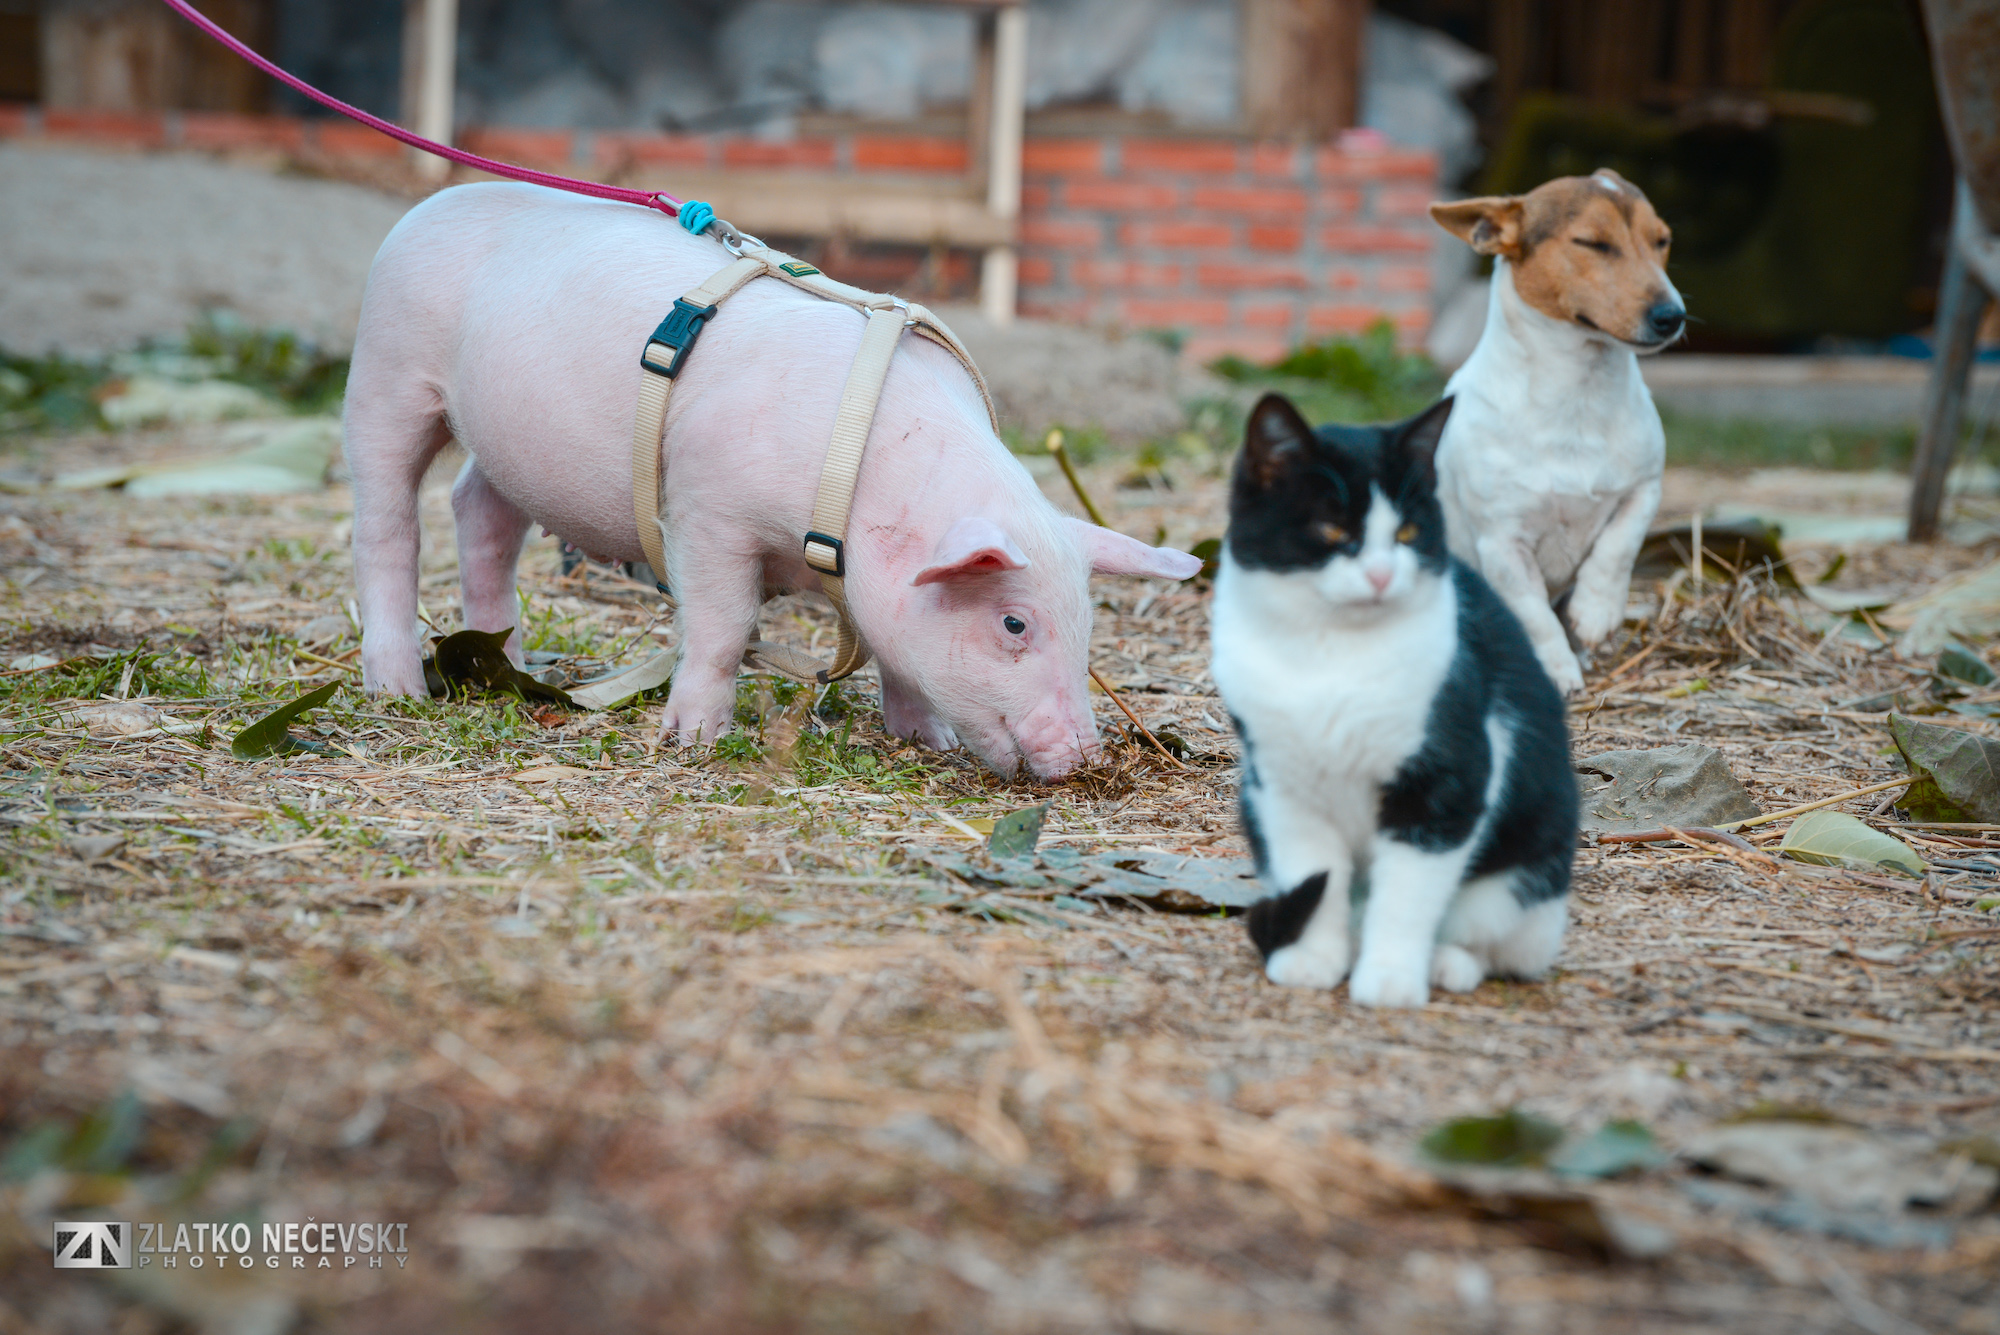 Piglet with a cat and dog